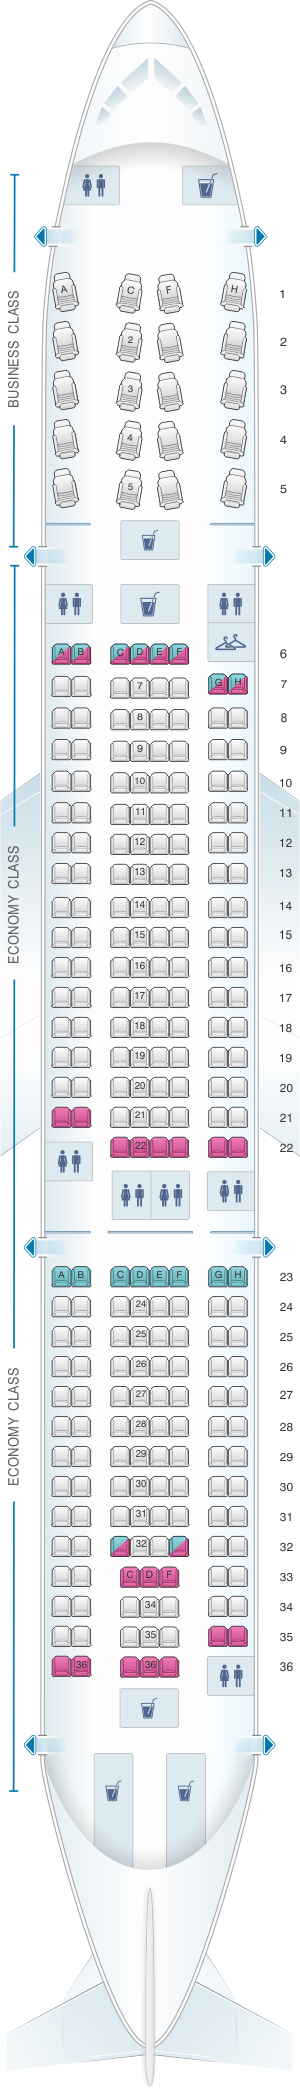 Seat Map American Airlines Airbus A330 200 Seatmaestro